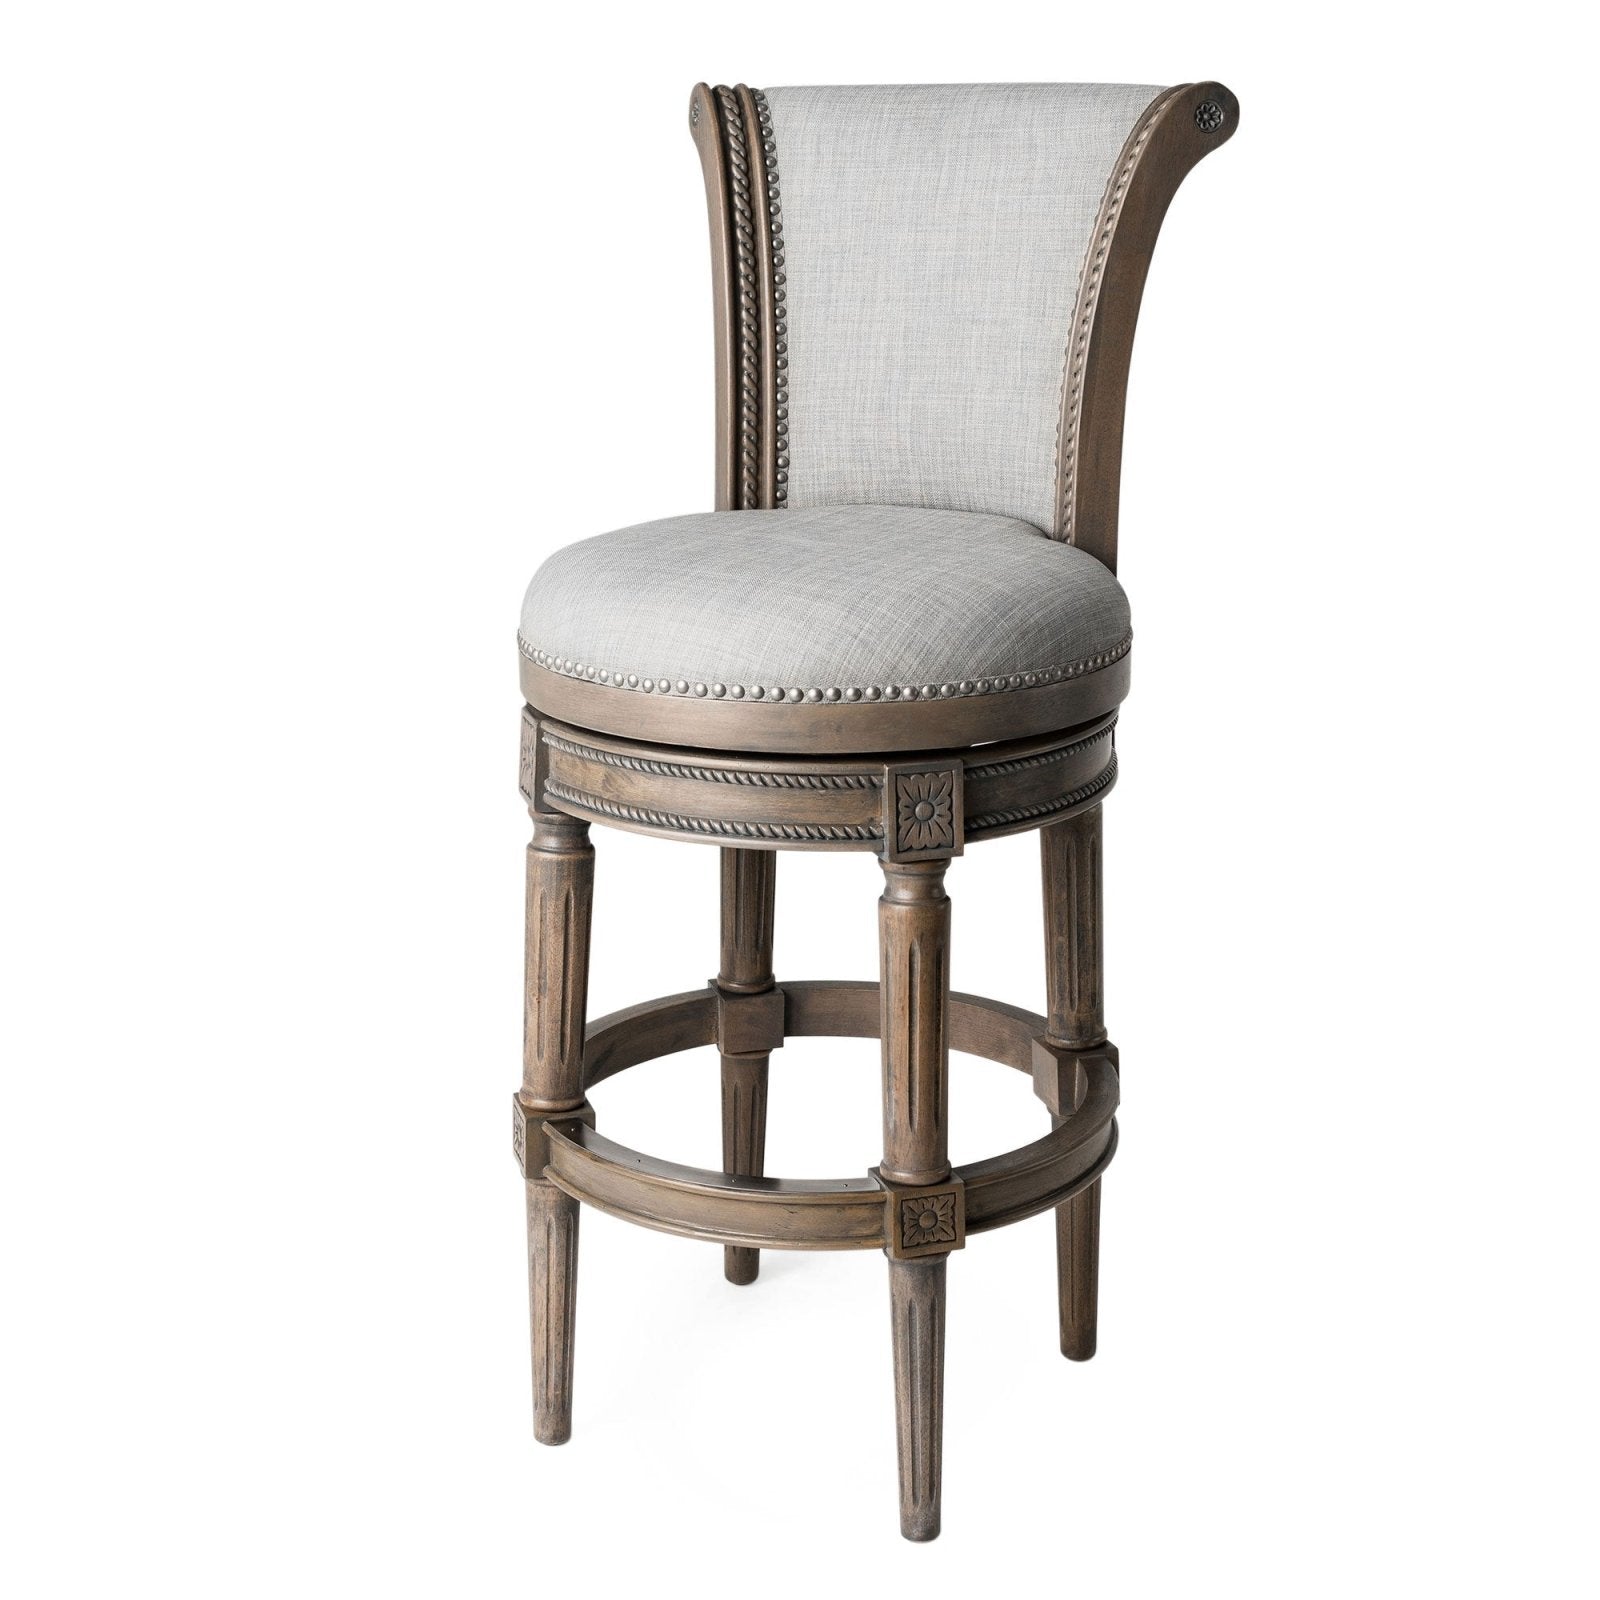 Pullman Bar Stool in Reclaimed Oak Finish with Ash Grey Fabric Upholstery in Stools by Maven Lane